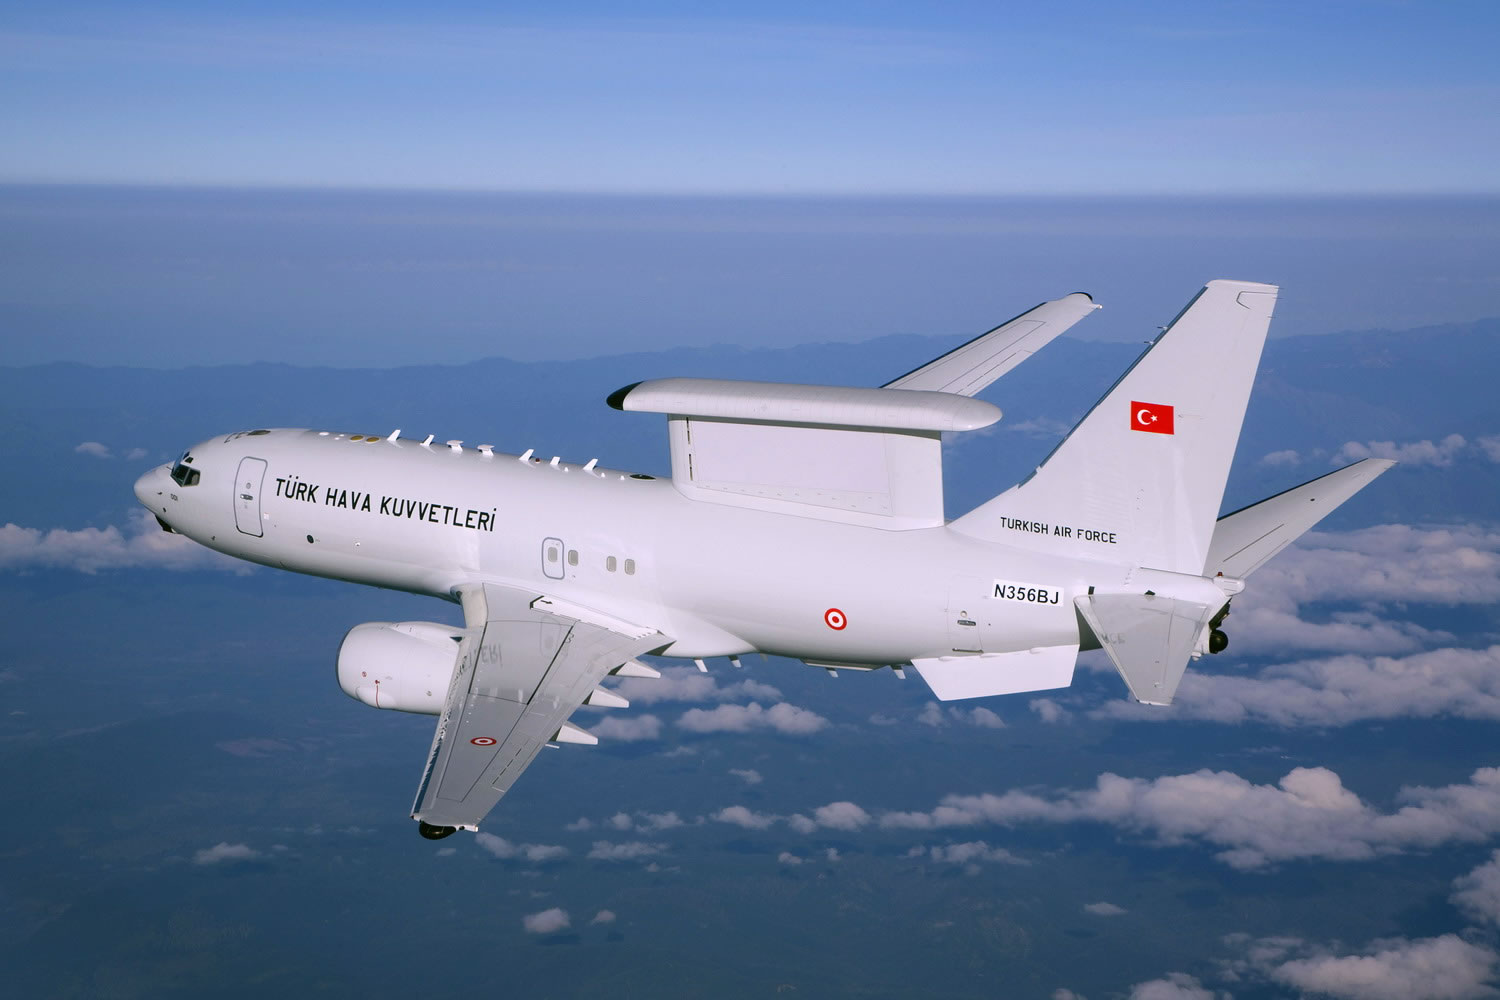 HQ Boeing 737 AEW&C Wallpapers | File 108.19Kb